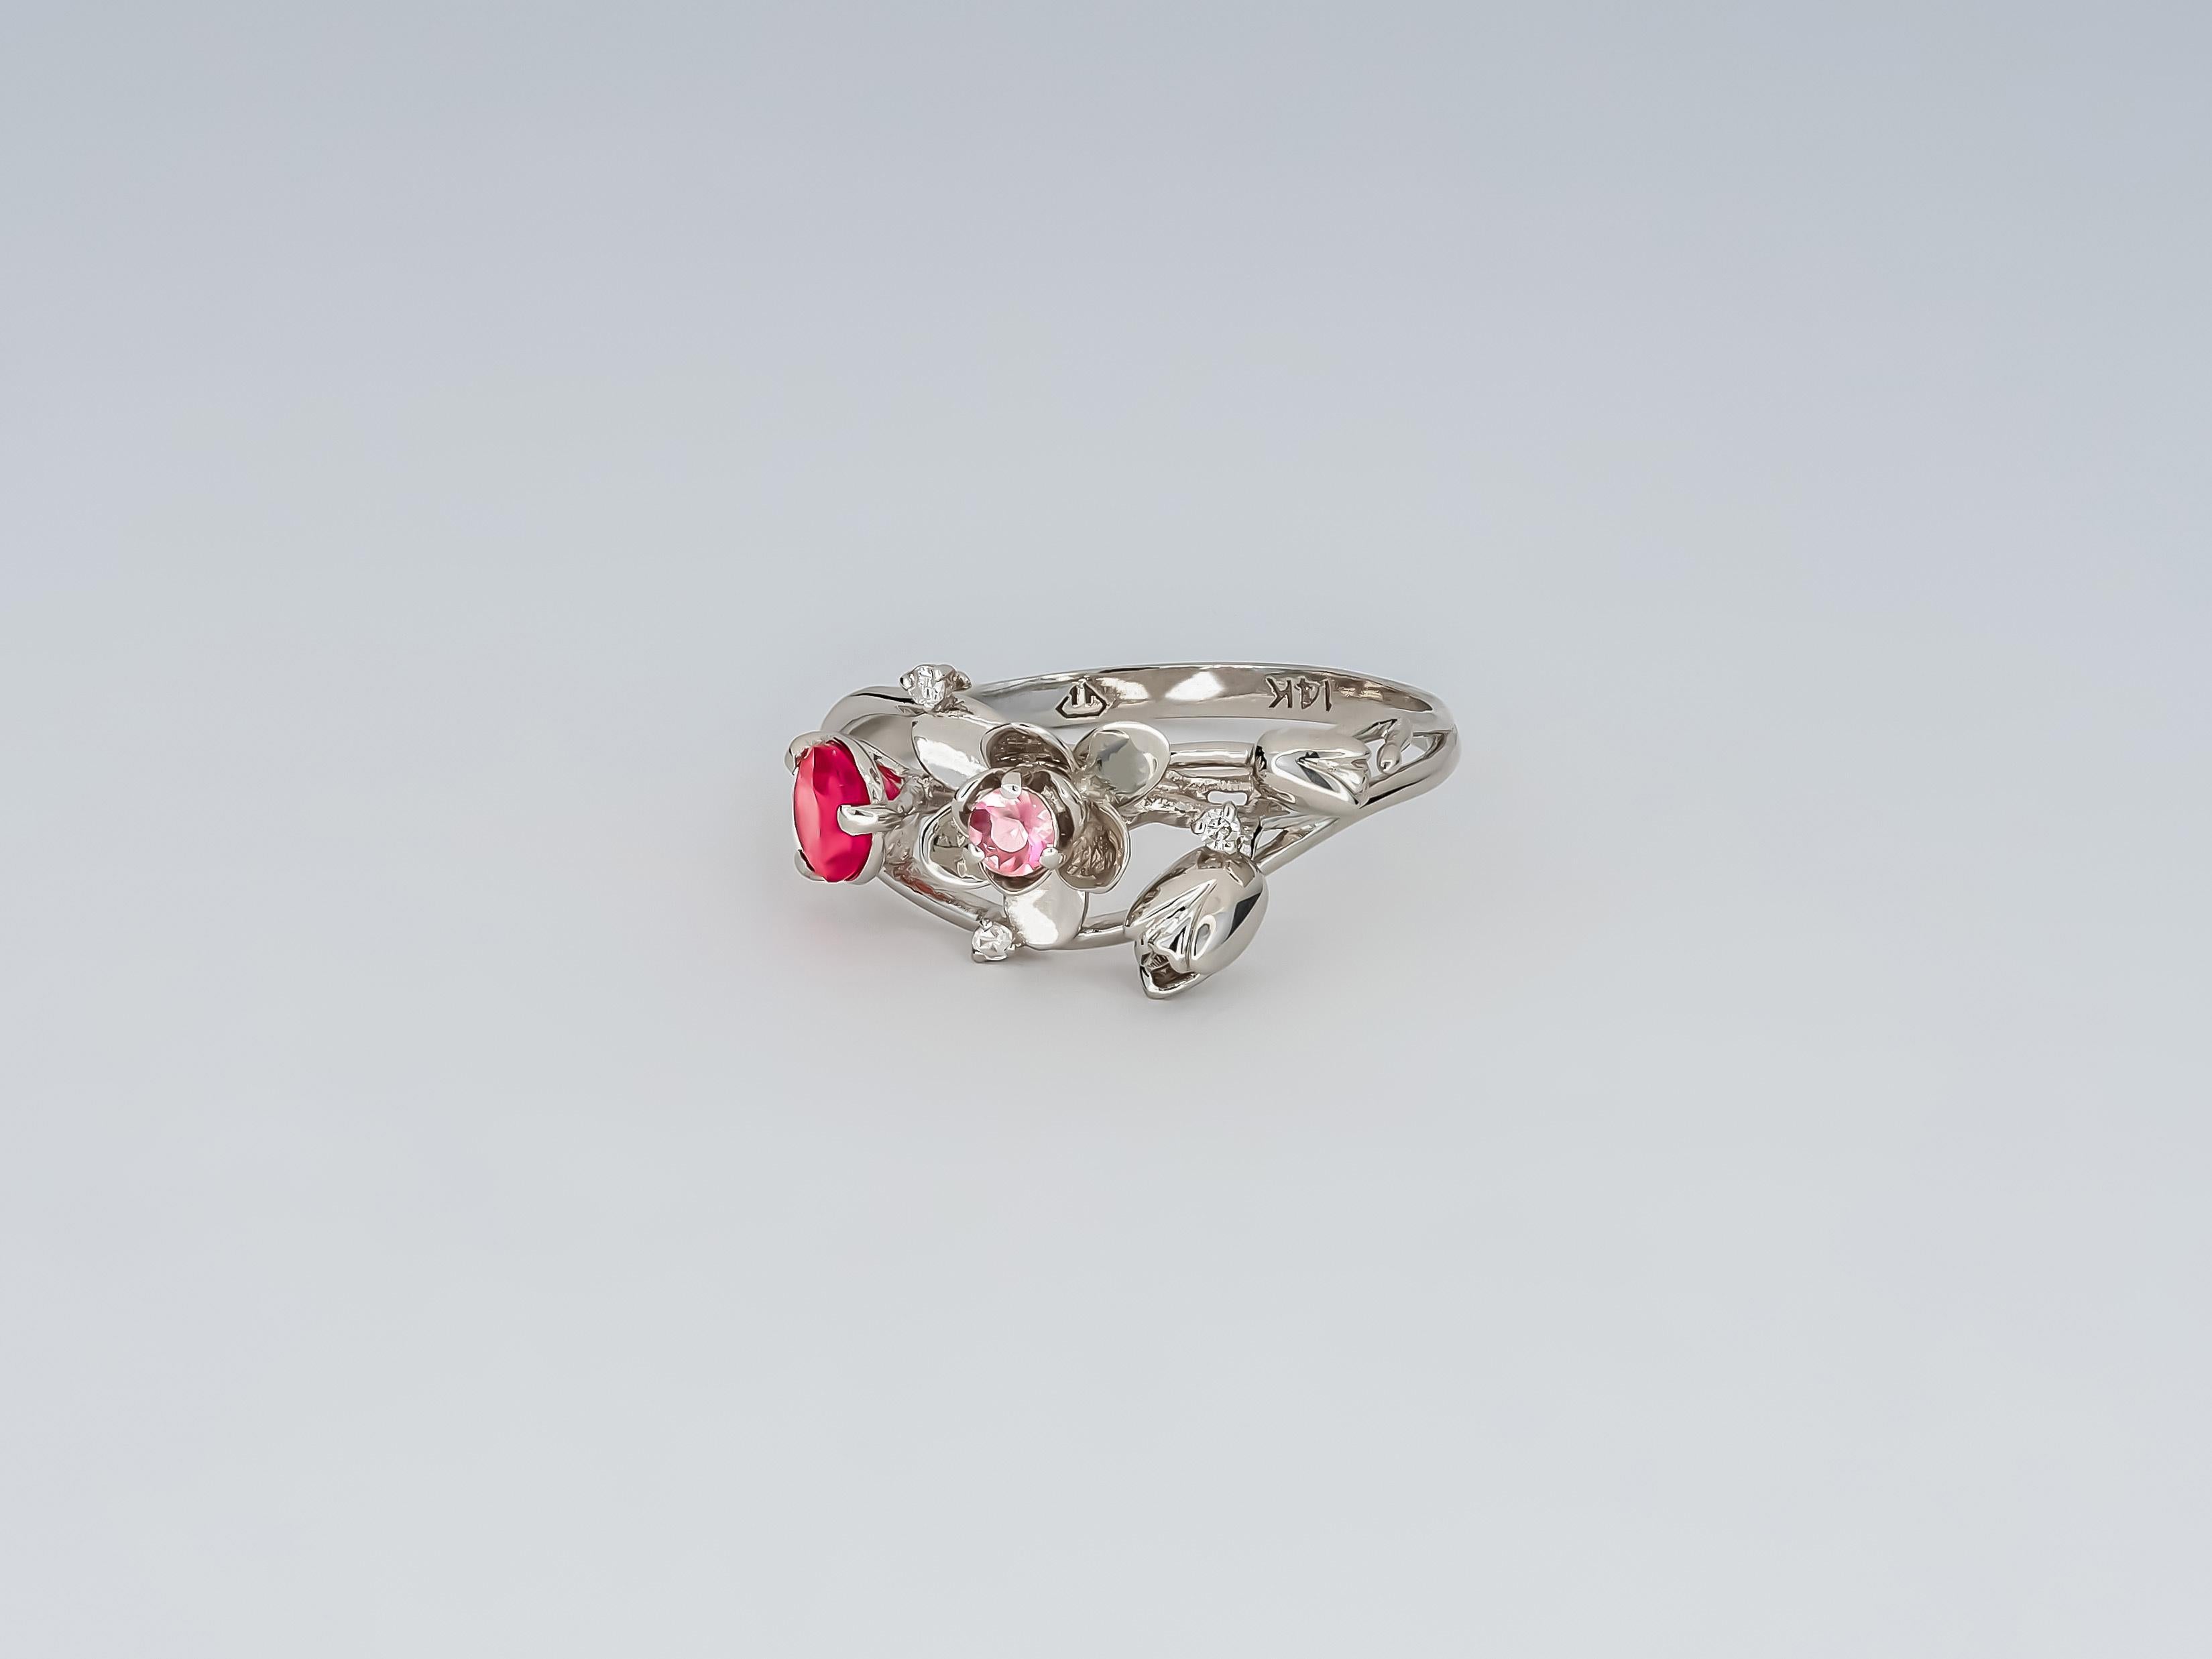 Women's 14 Karat White Gold Ring with Ruby, Sapphire and Diamonds. Orchid Gold Ring. 